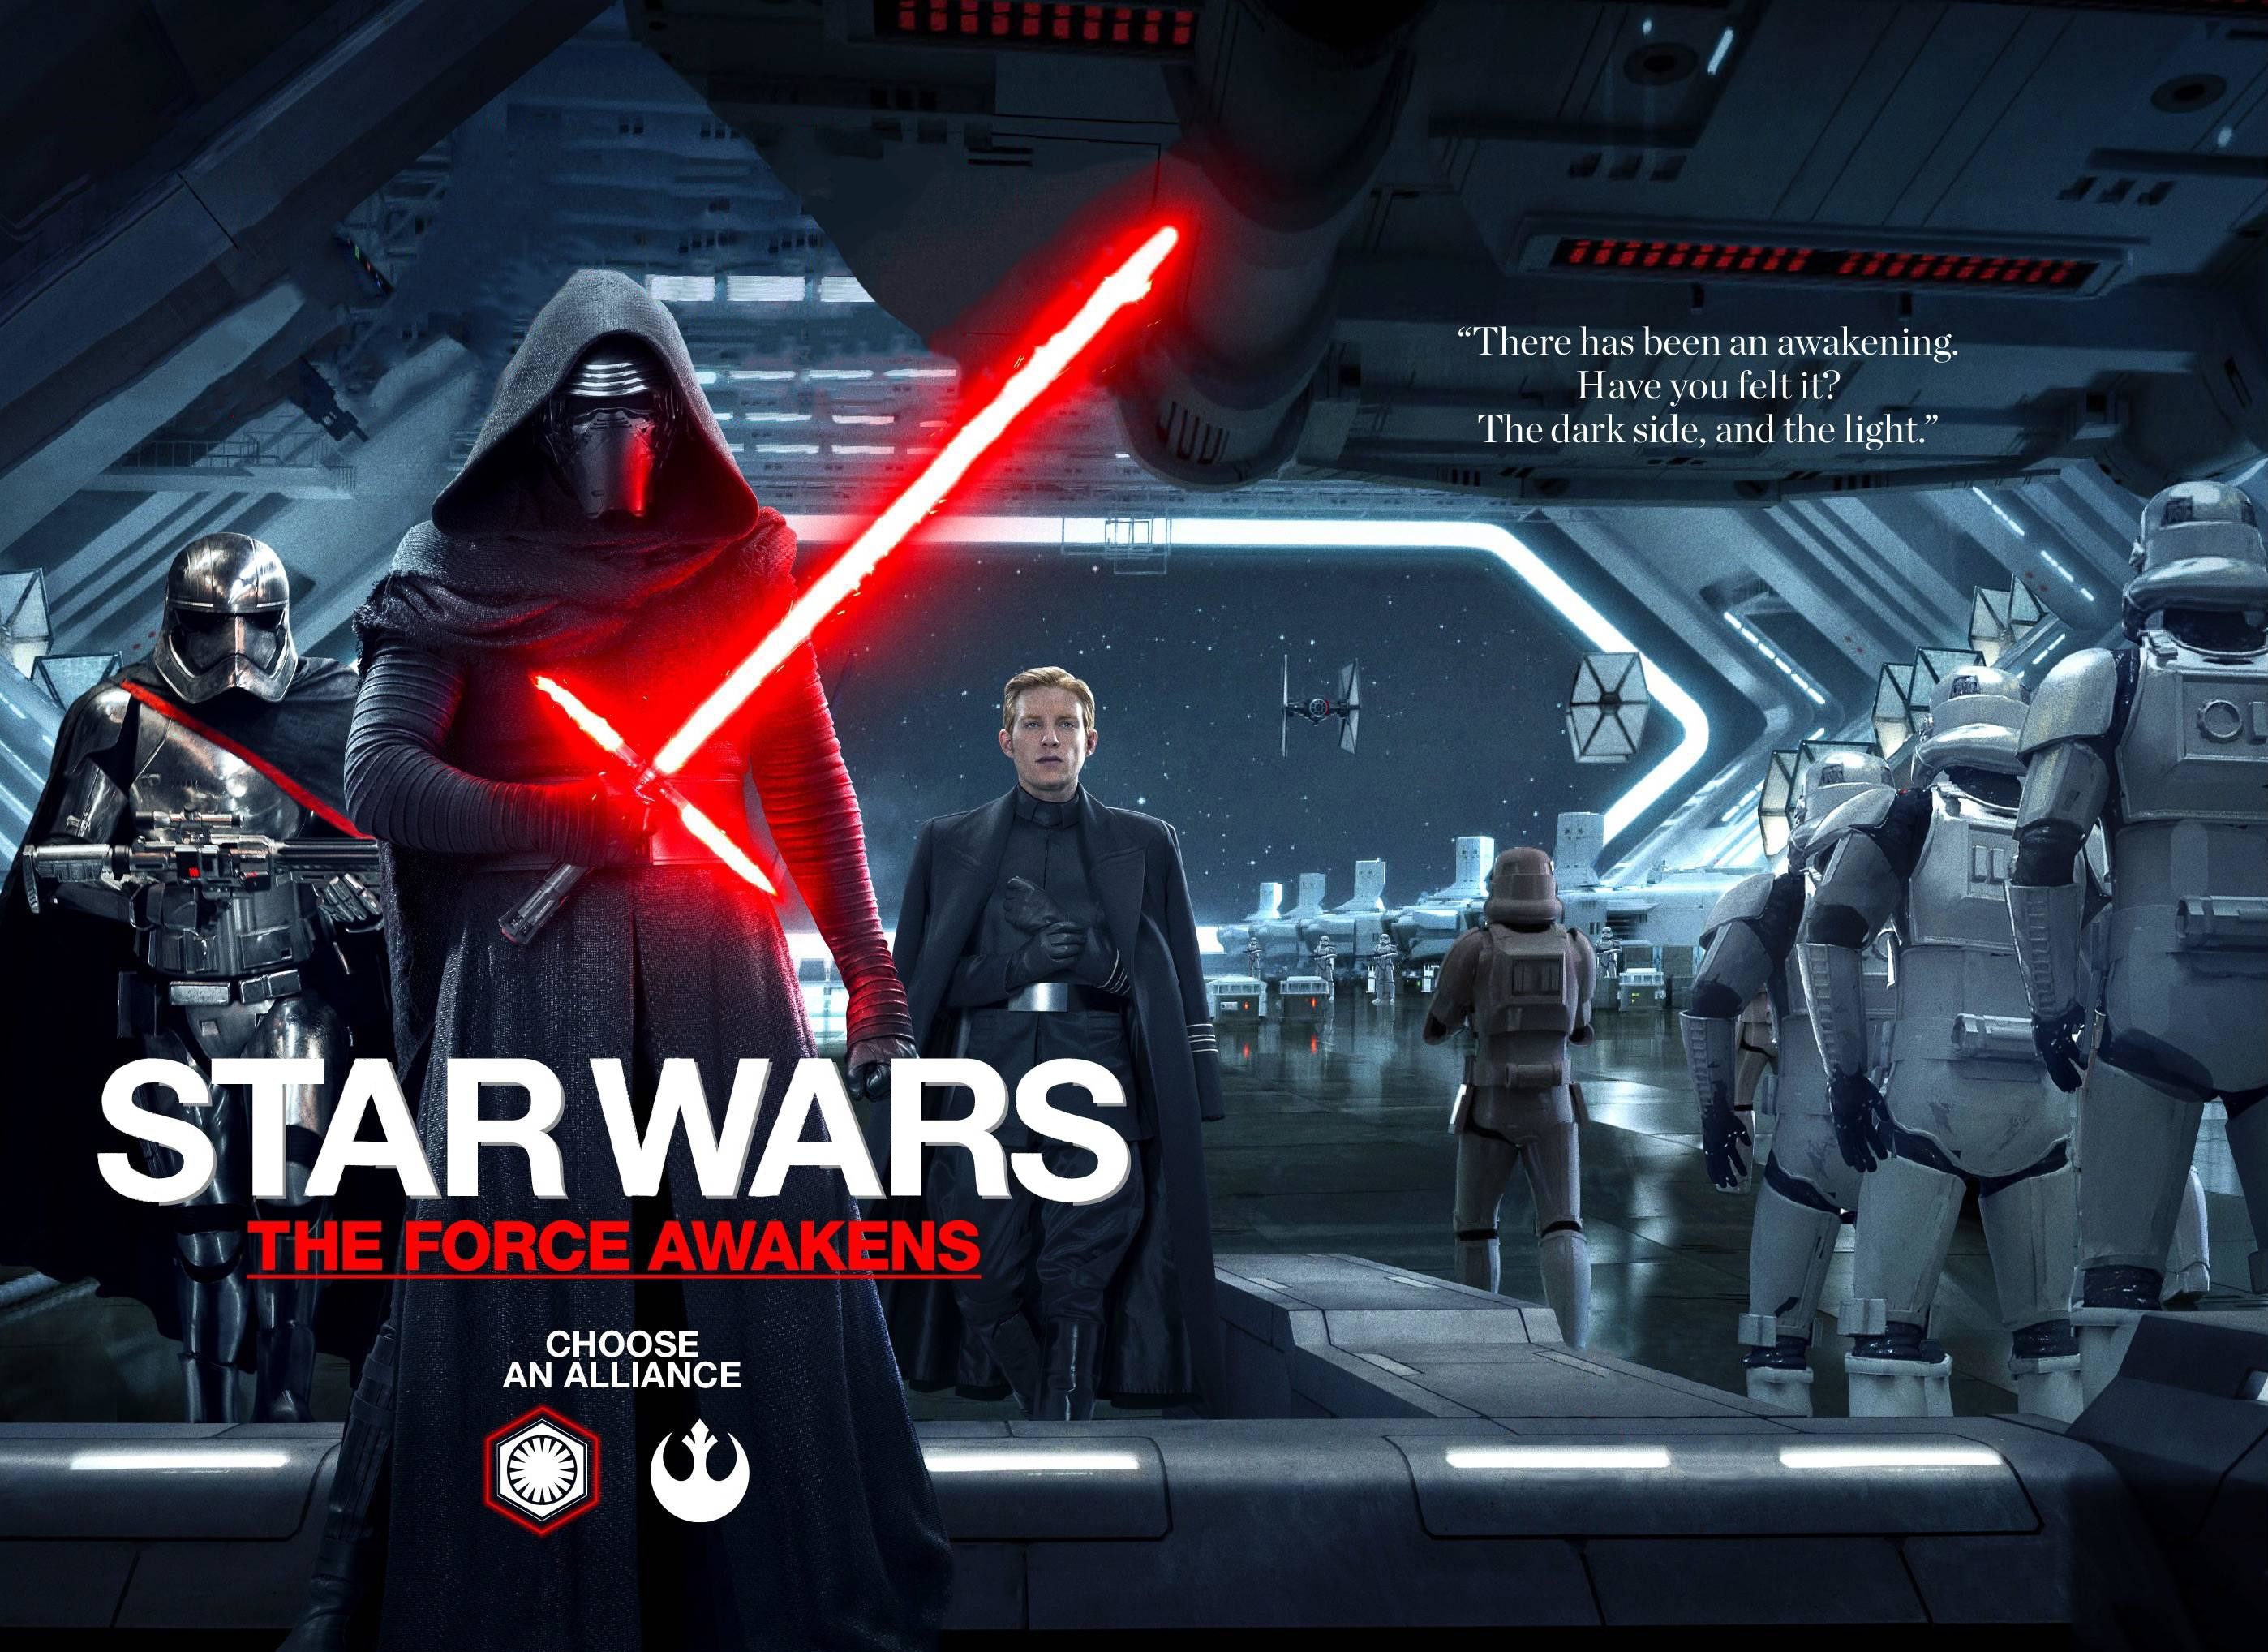 Star Wars The Force Awakens Empire Magazine First Order Cover Wallpaper / Poster Edit